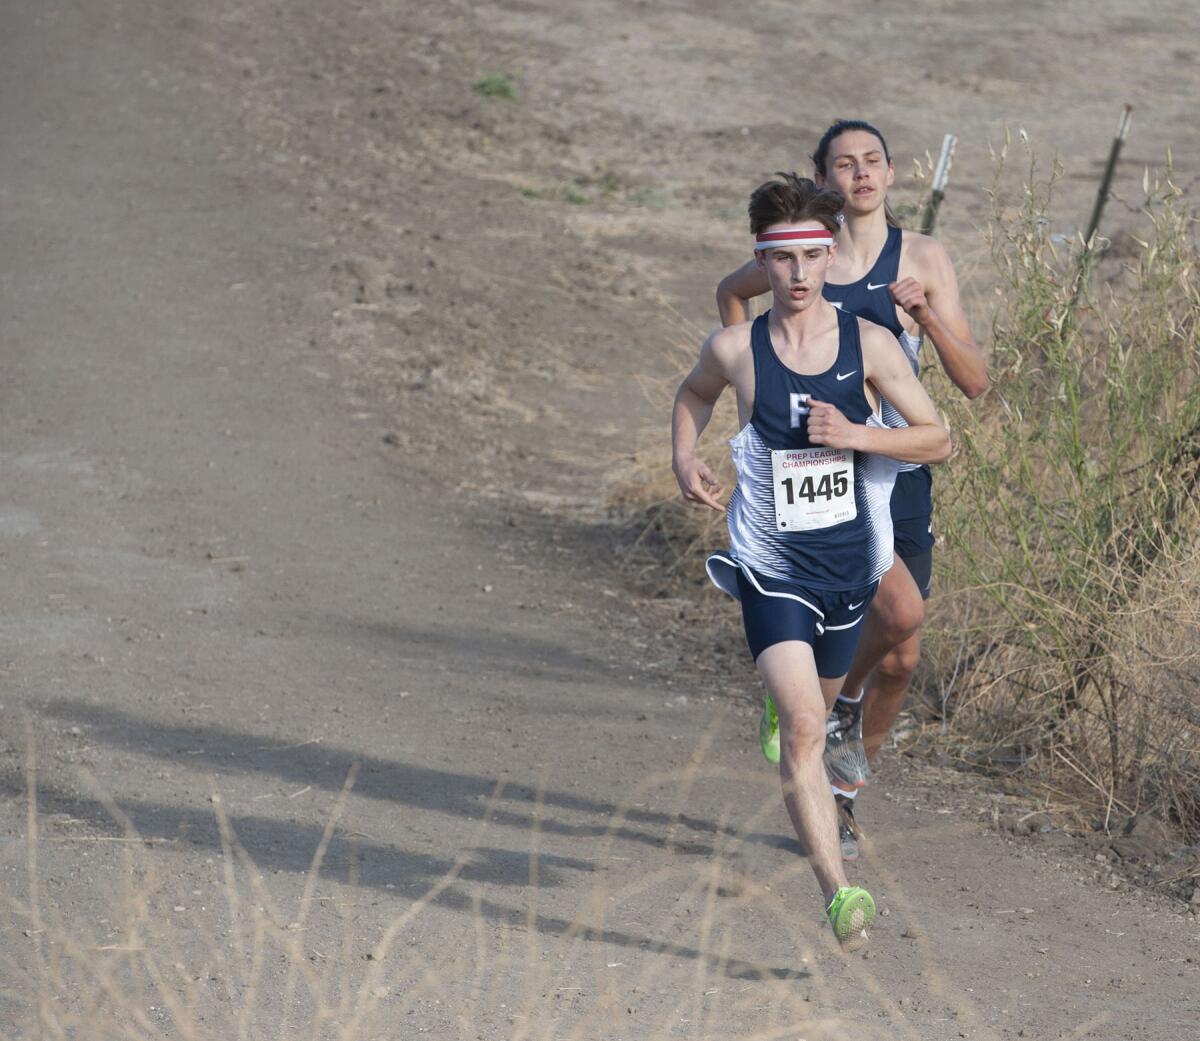 Flintridge Prep's Bennett Oakes (front) and Hudson Billock break away from the pack to lead the boys' race at Saturday's Prep League finals at Los Angeles Pierce College.